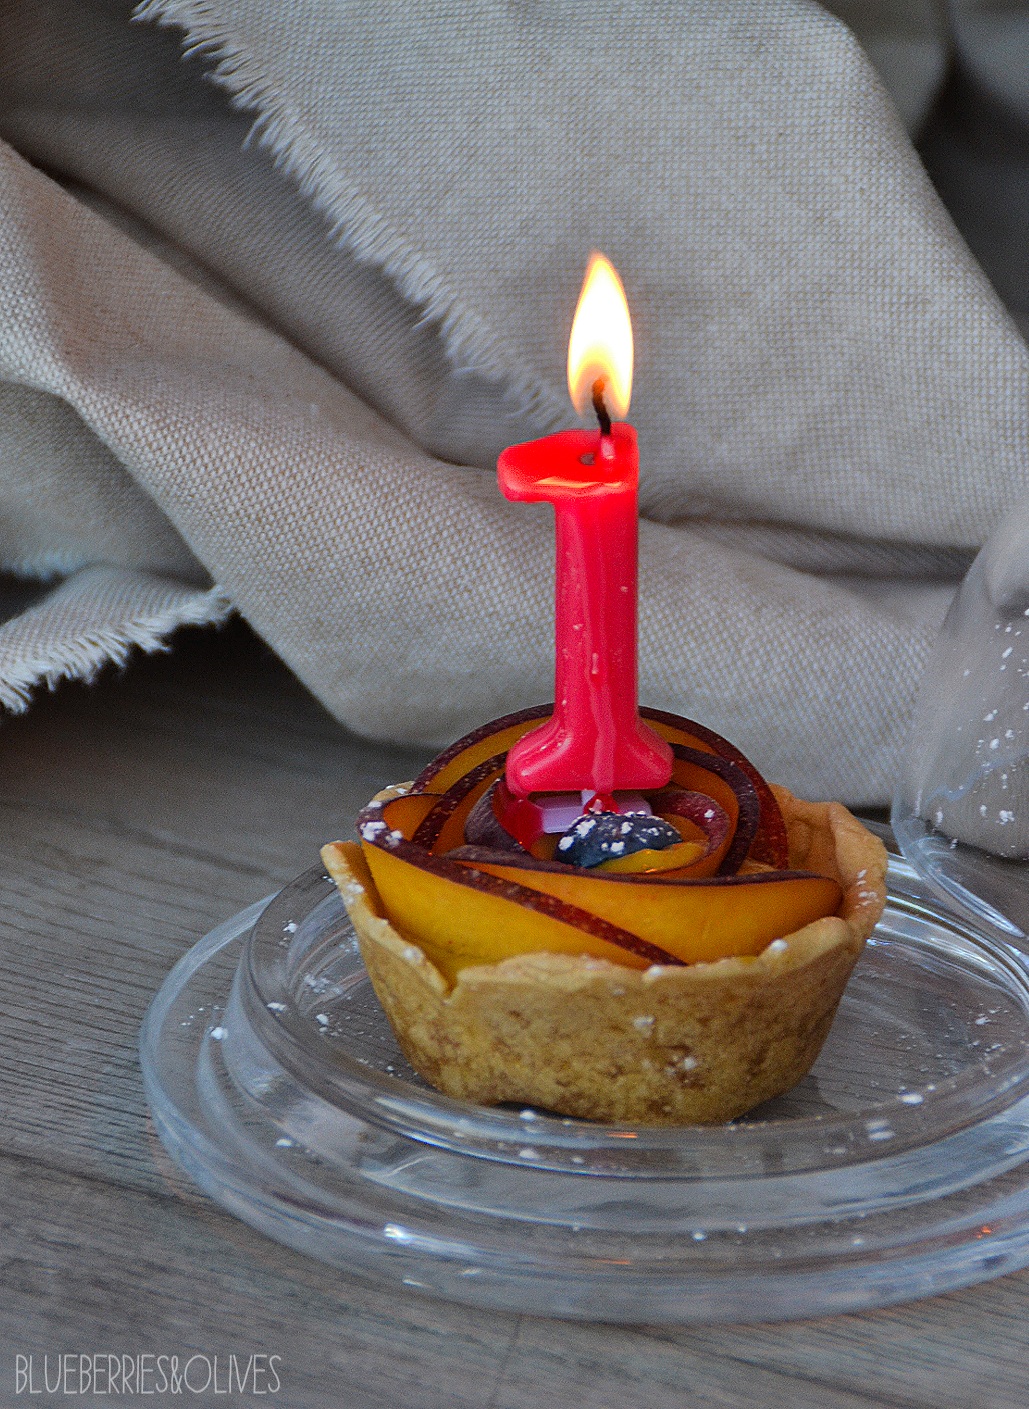 PEACH AND BLUEBERRY TARTLETS WITH VANILLA CUSTARD + BLUEBERRIES&OLIVES 1ST ANNIVERSARY